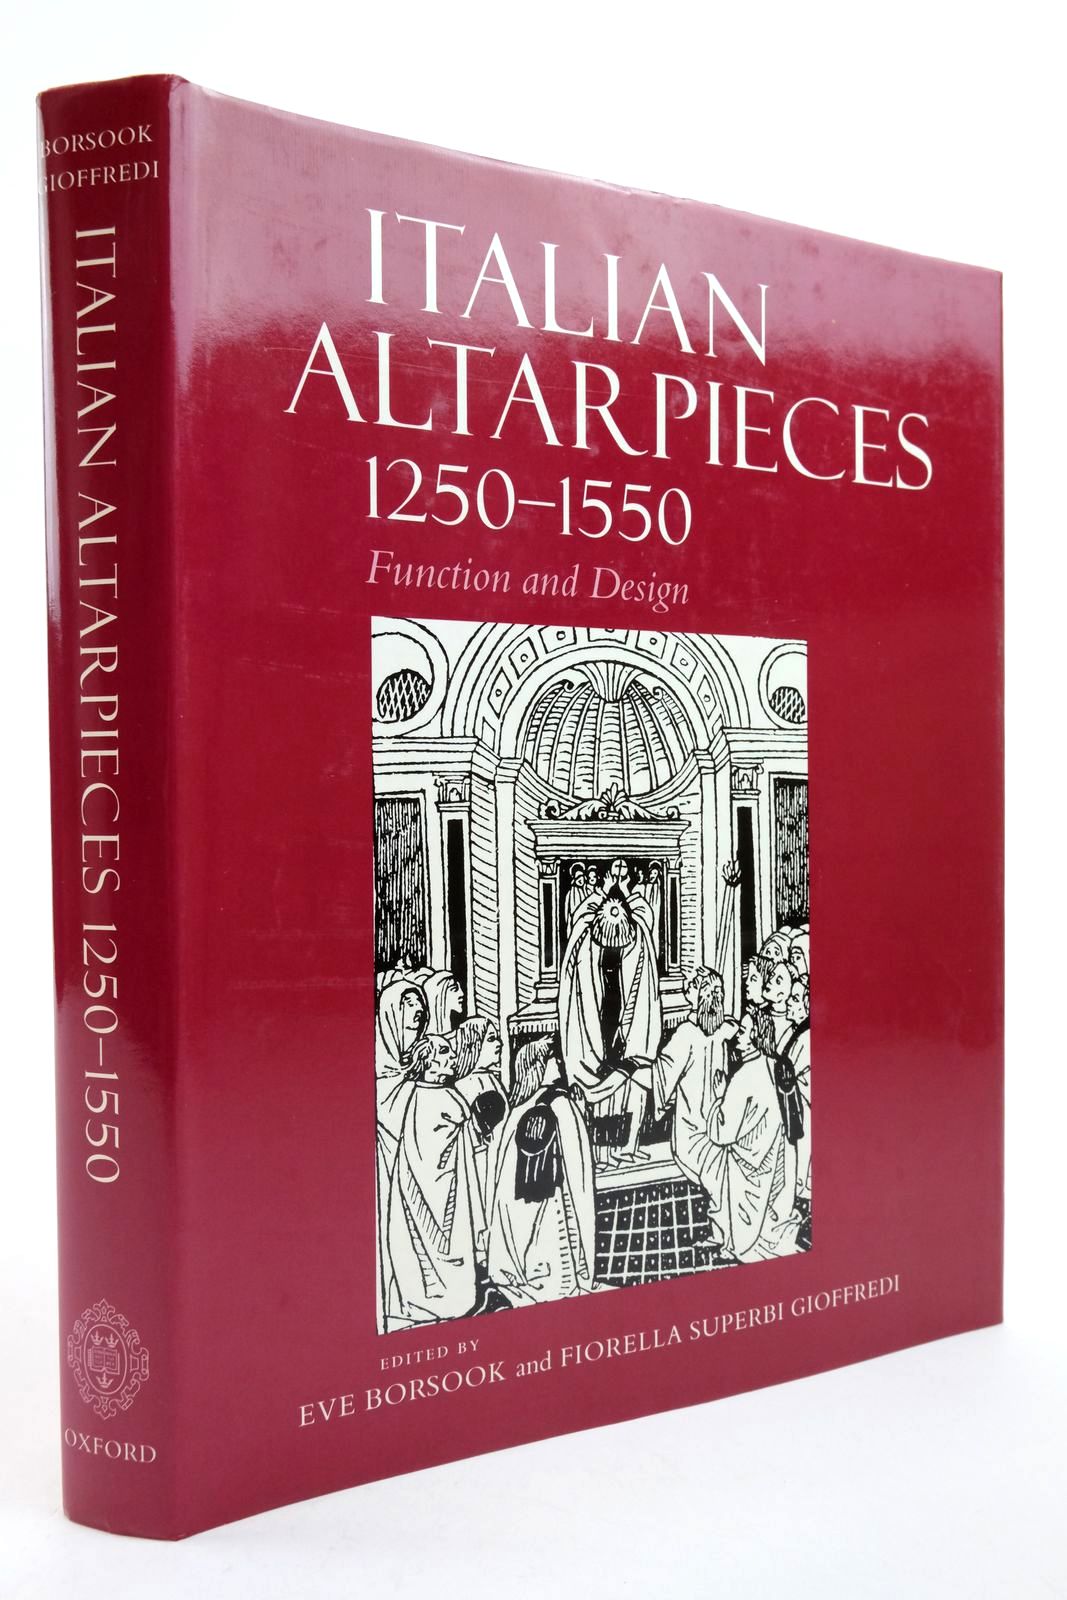 Photo of ITALIAN ALTARPIECES 1250 - 1550: FUNCTION AND DESIGN written by Borsook, Eve Gioffredi, Fiorella Superbi published by Clarendon Press (STOCK CODE: 2138862)  for sale by Stella & Rose's Books